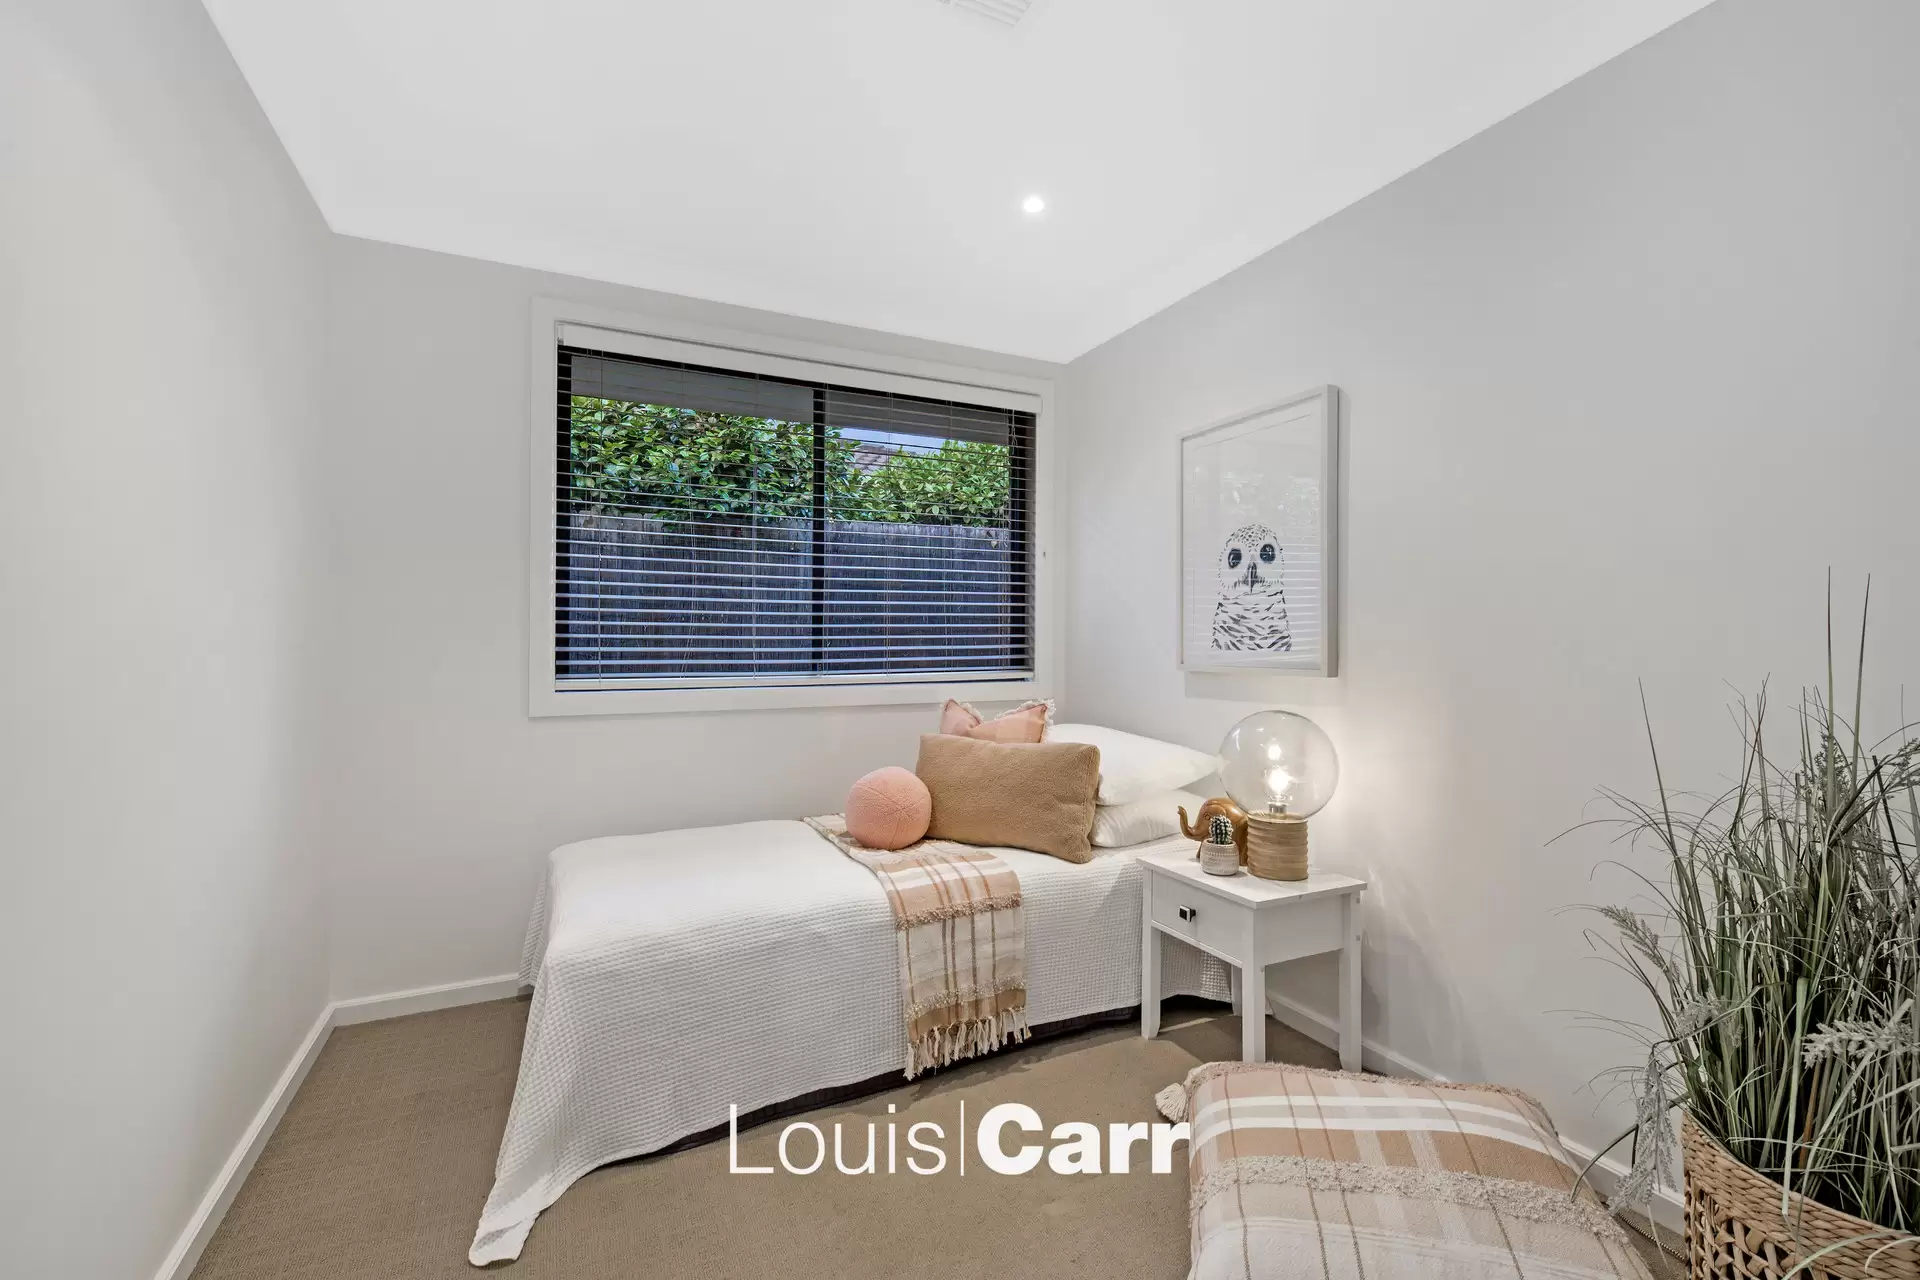 Photo #14: 18 Chiltern Crescent, Castle Hill - Sold by Louis Carr Real Estate